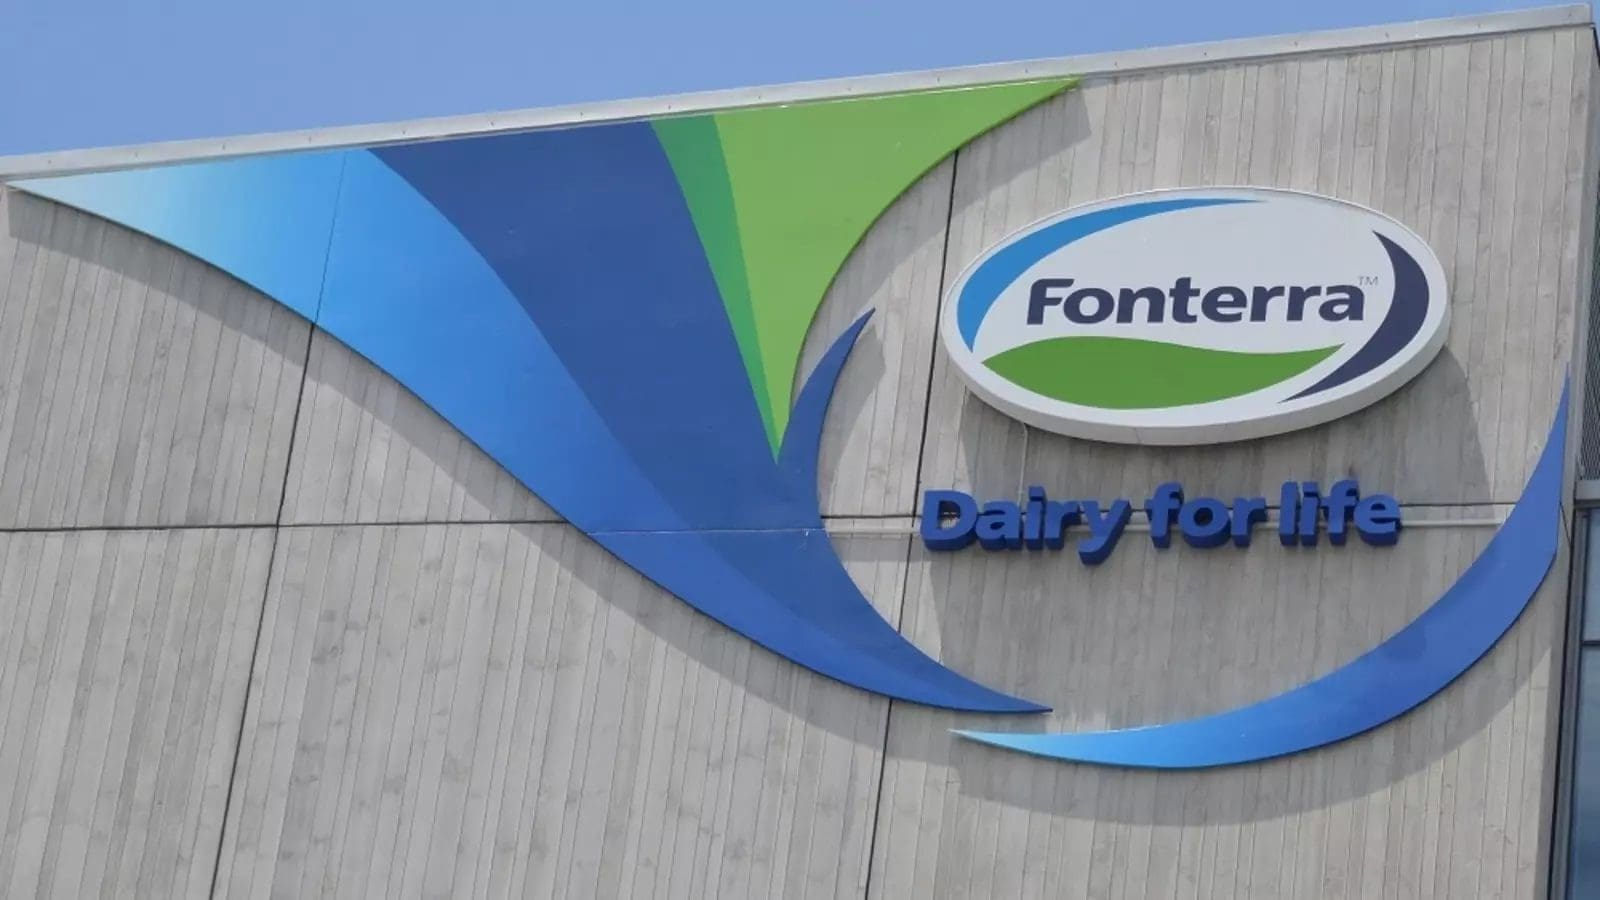 Fonterra reveals ambitious plan to cut US$598 million in costs amid global dairy price decline